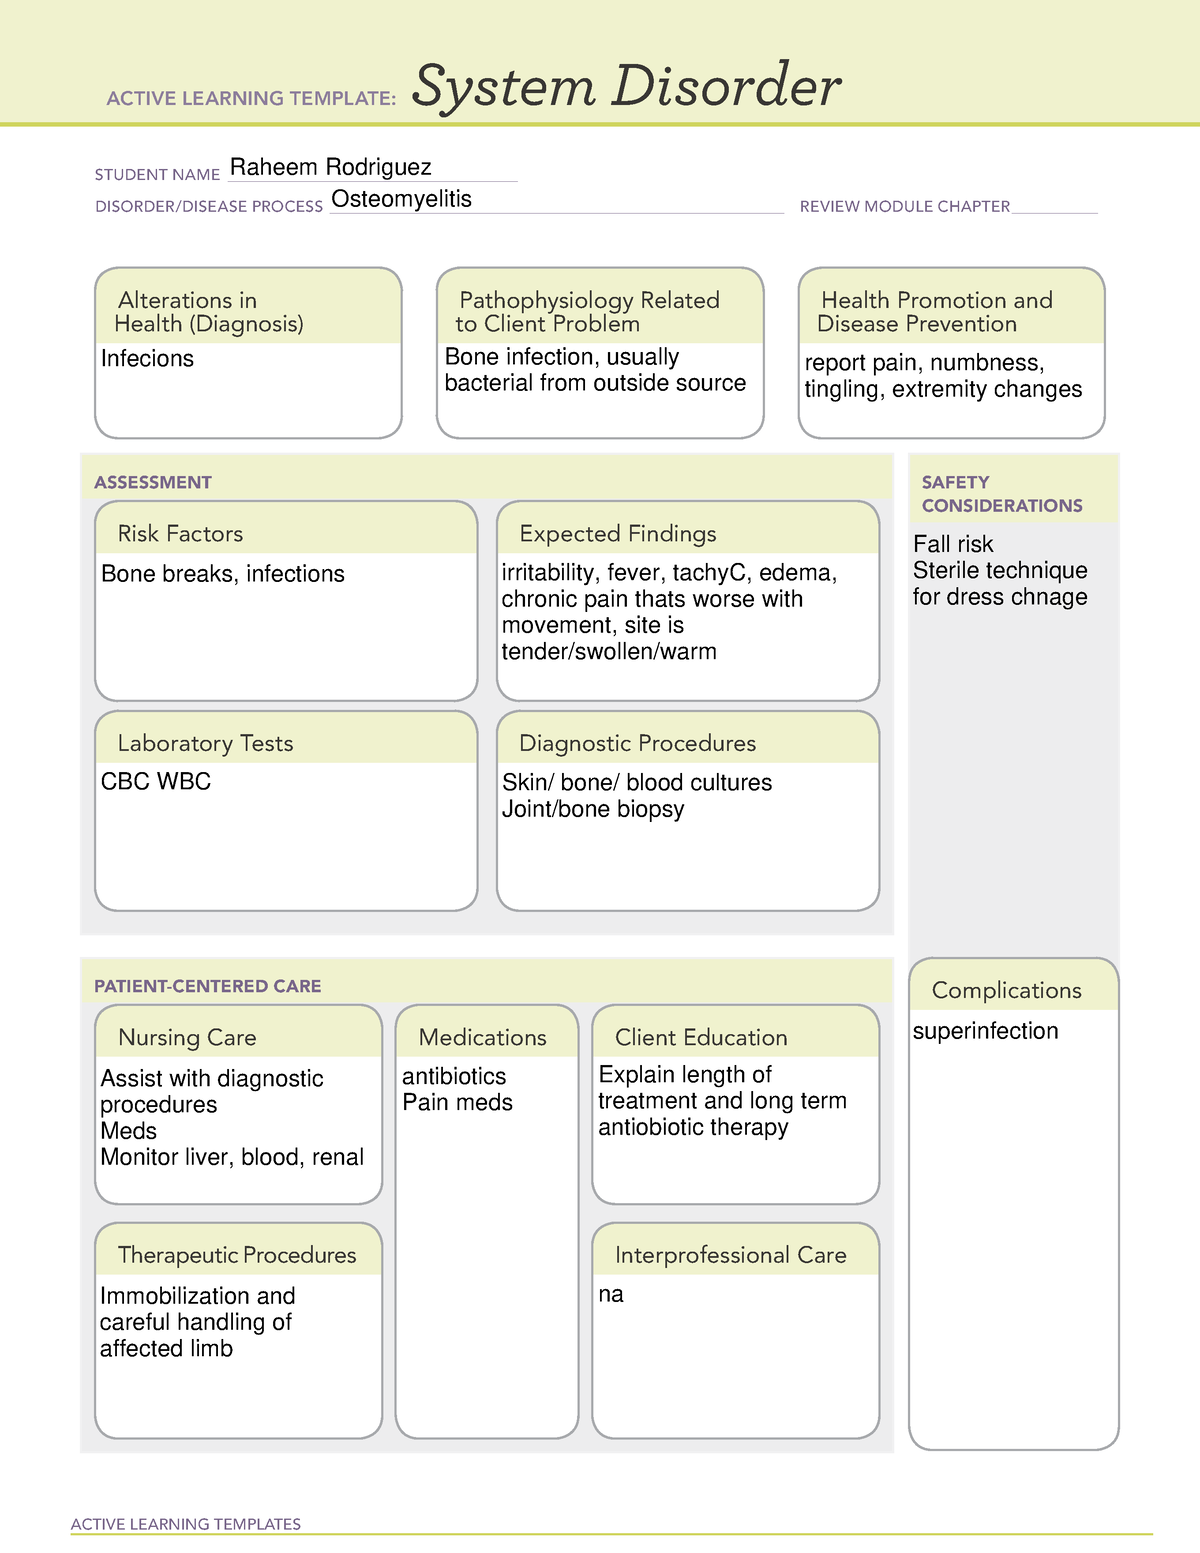 ATI system disorder template Osteomyelitis ACTIVE LEARNING TEMPLATES